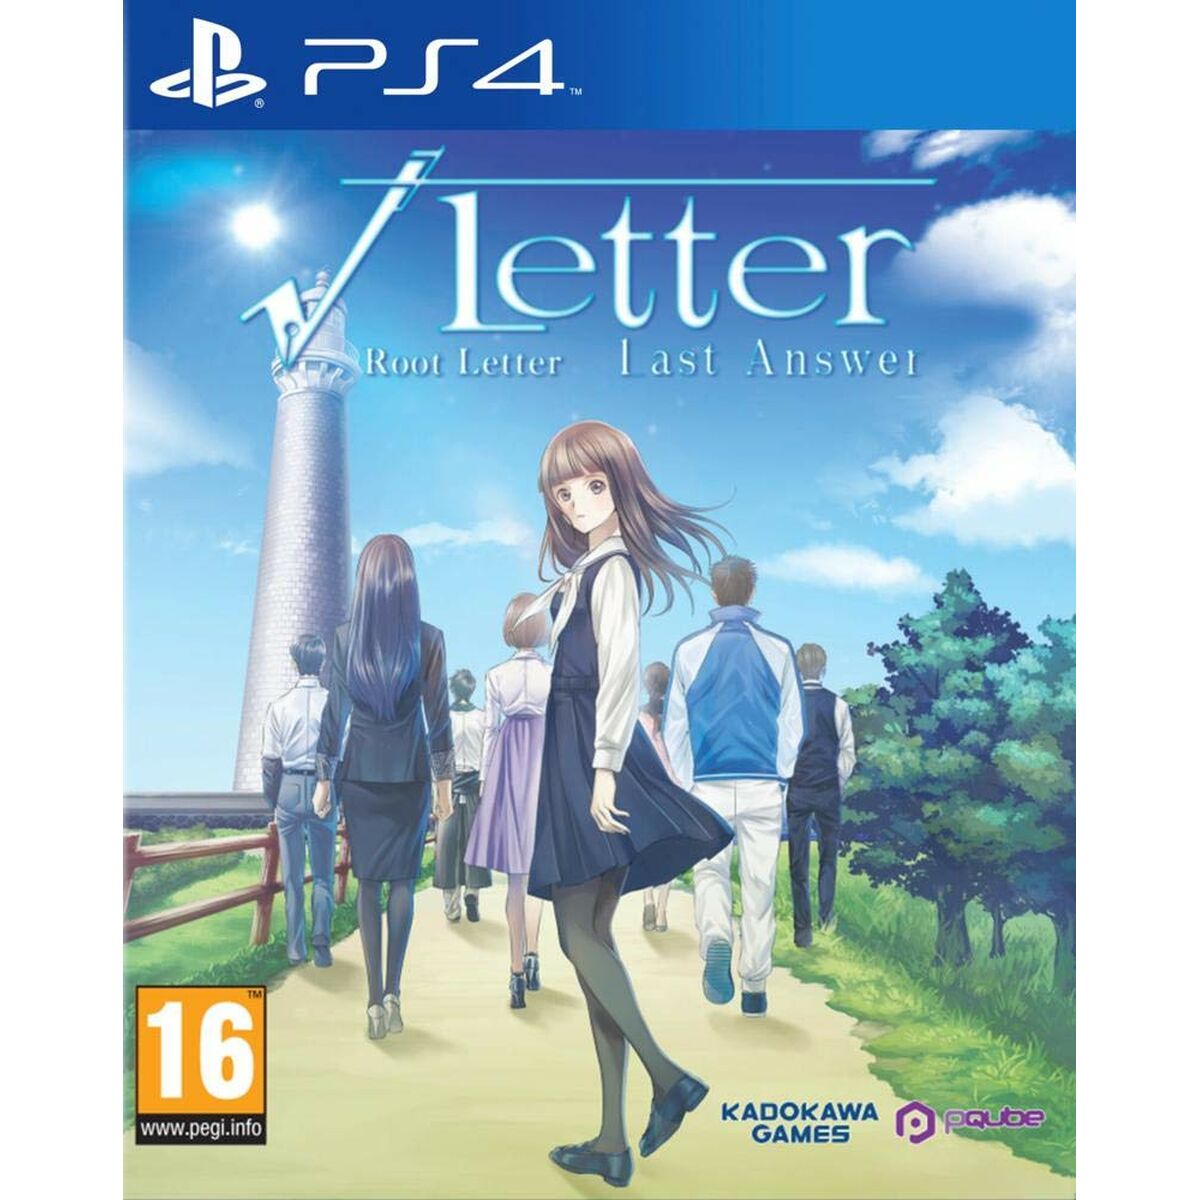 Jeu vidéo PlayStation 4 Meridiem Games Root Letter: Last Answer - Day One Edition